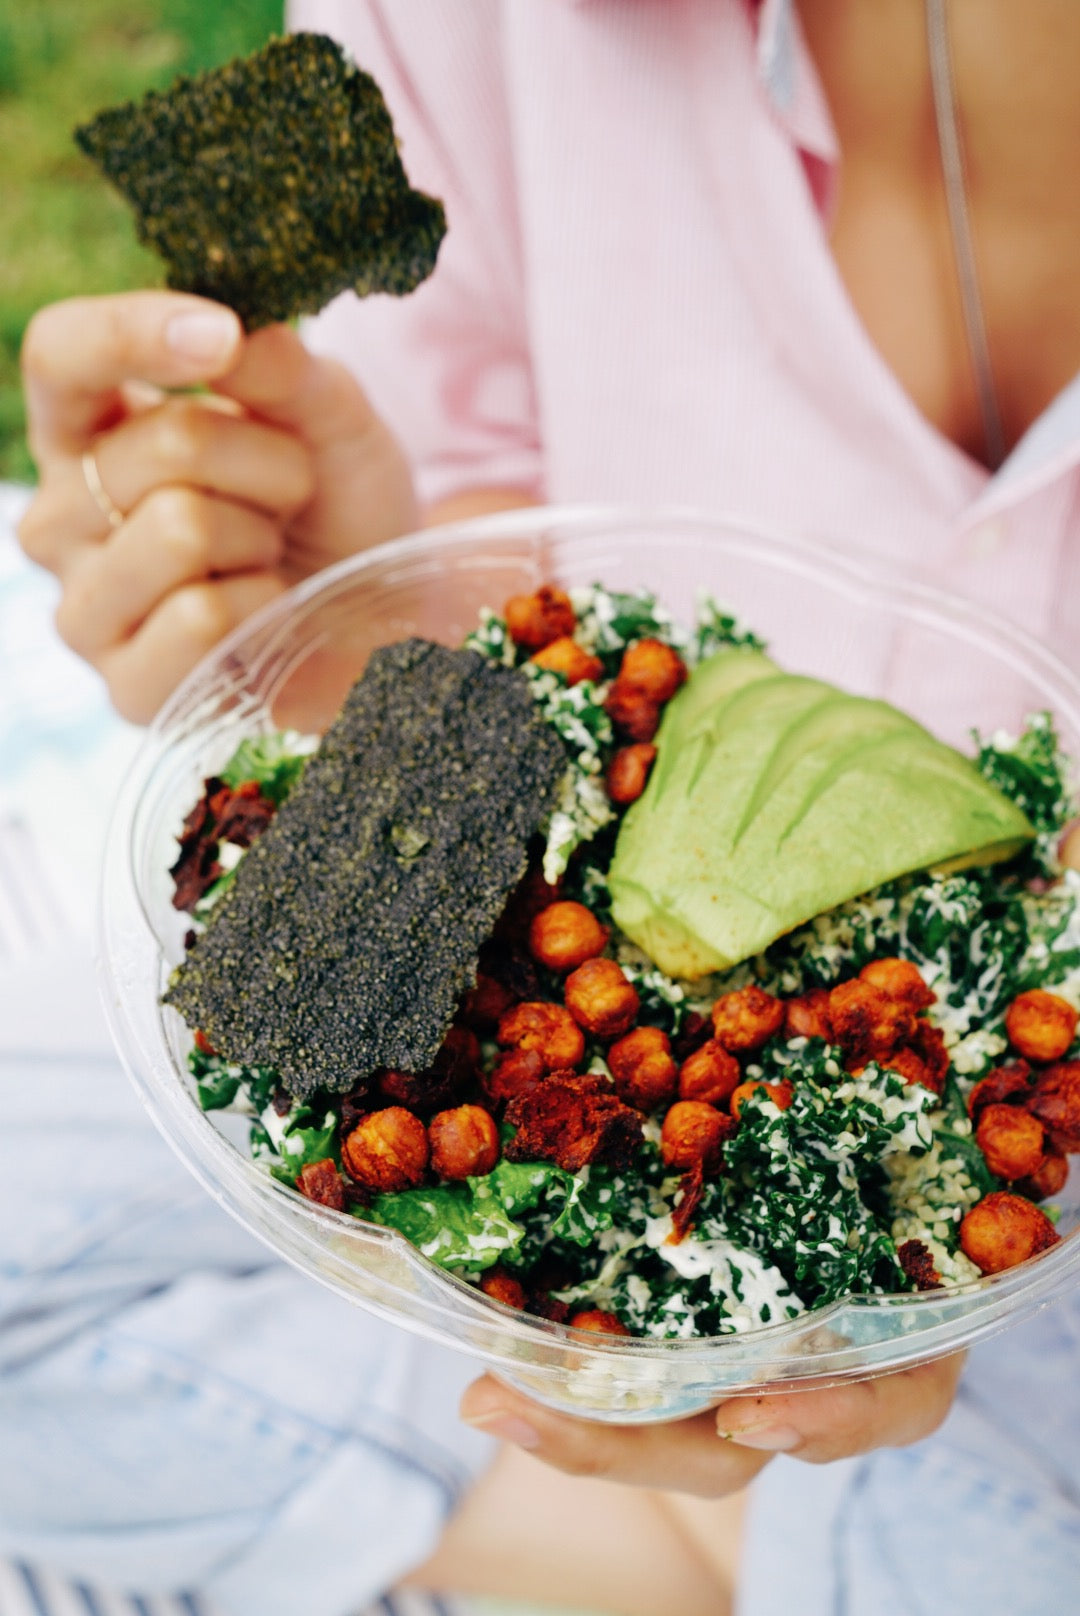 Nora Seaweed Snacks strips are shown being used in a healthy salad